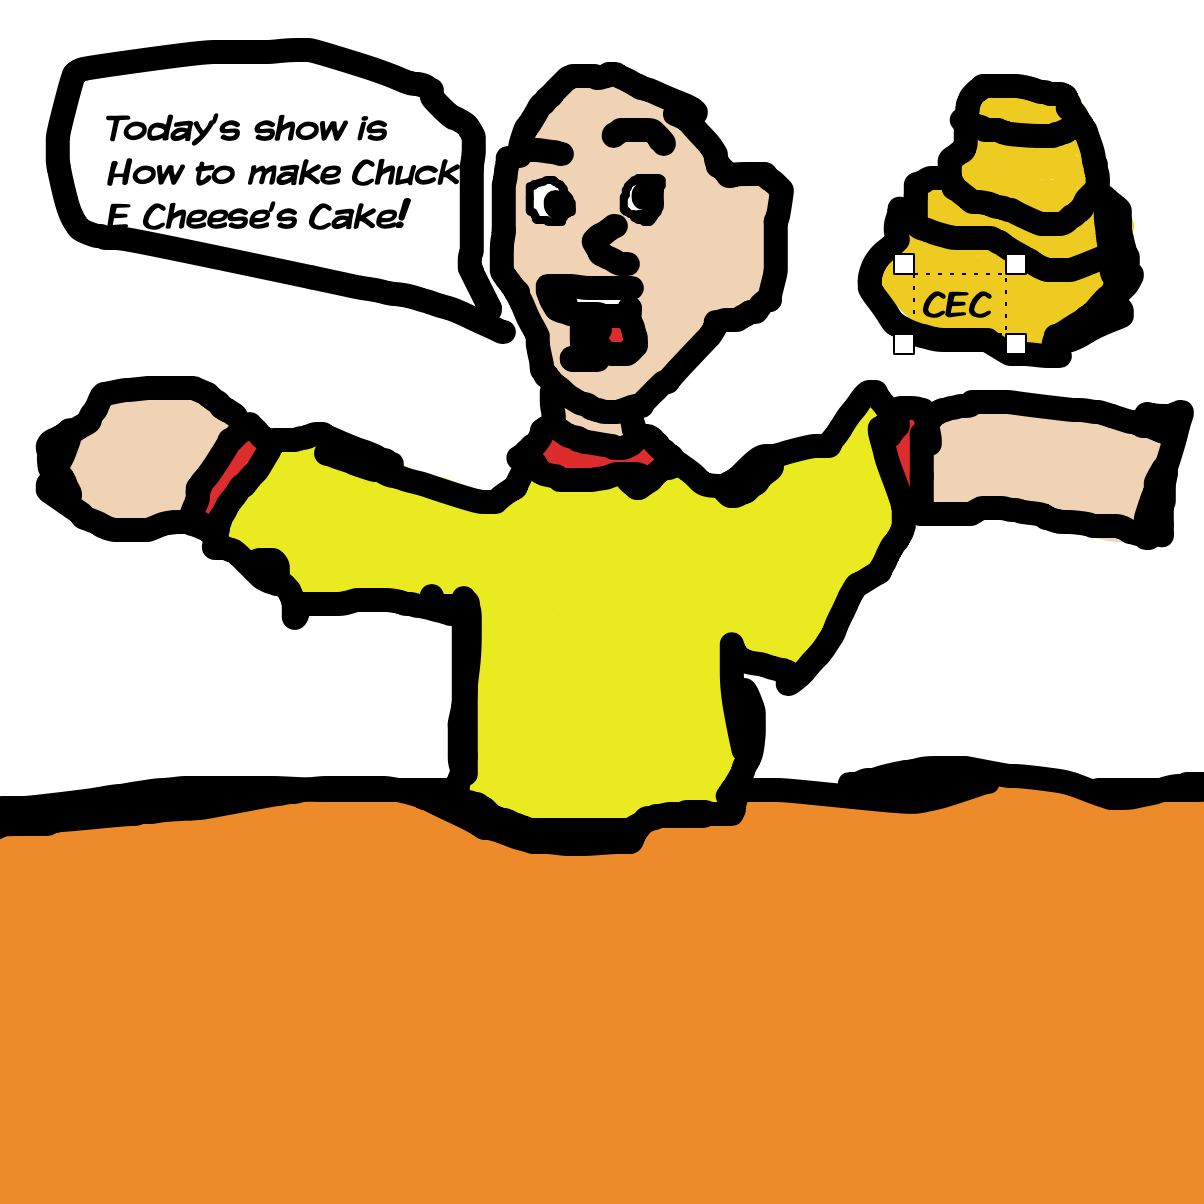 Caillou talks about chuck e cheese's cake - Online Drawing Game Comic Strip Panel by KianYates